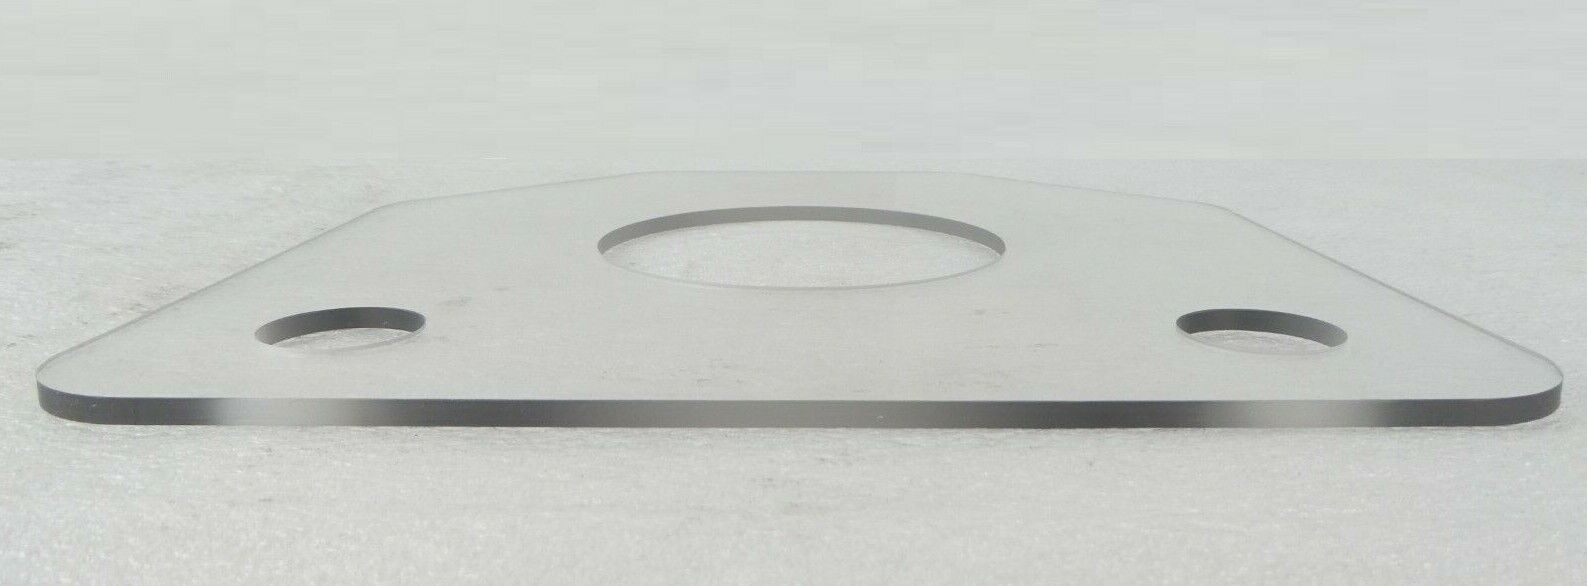 AMAT Applied Materials 0020-34753 125mm Centering Plate New Surplus